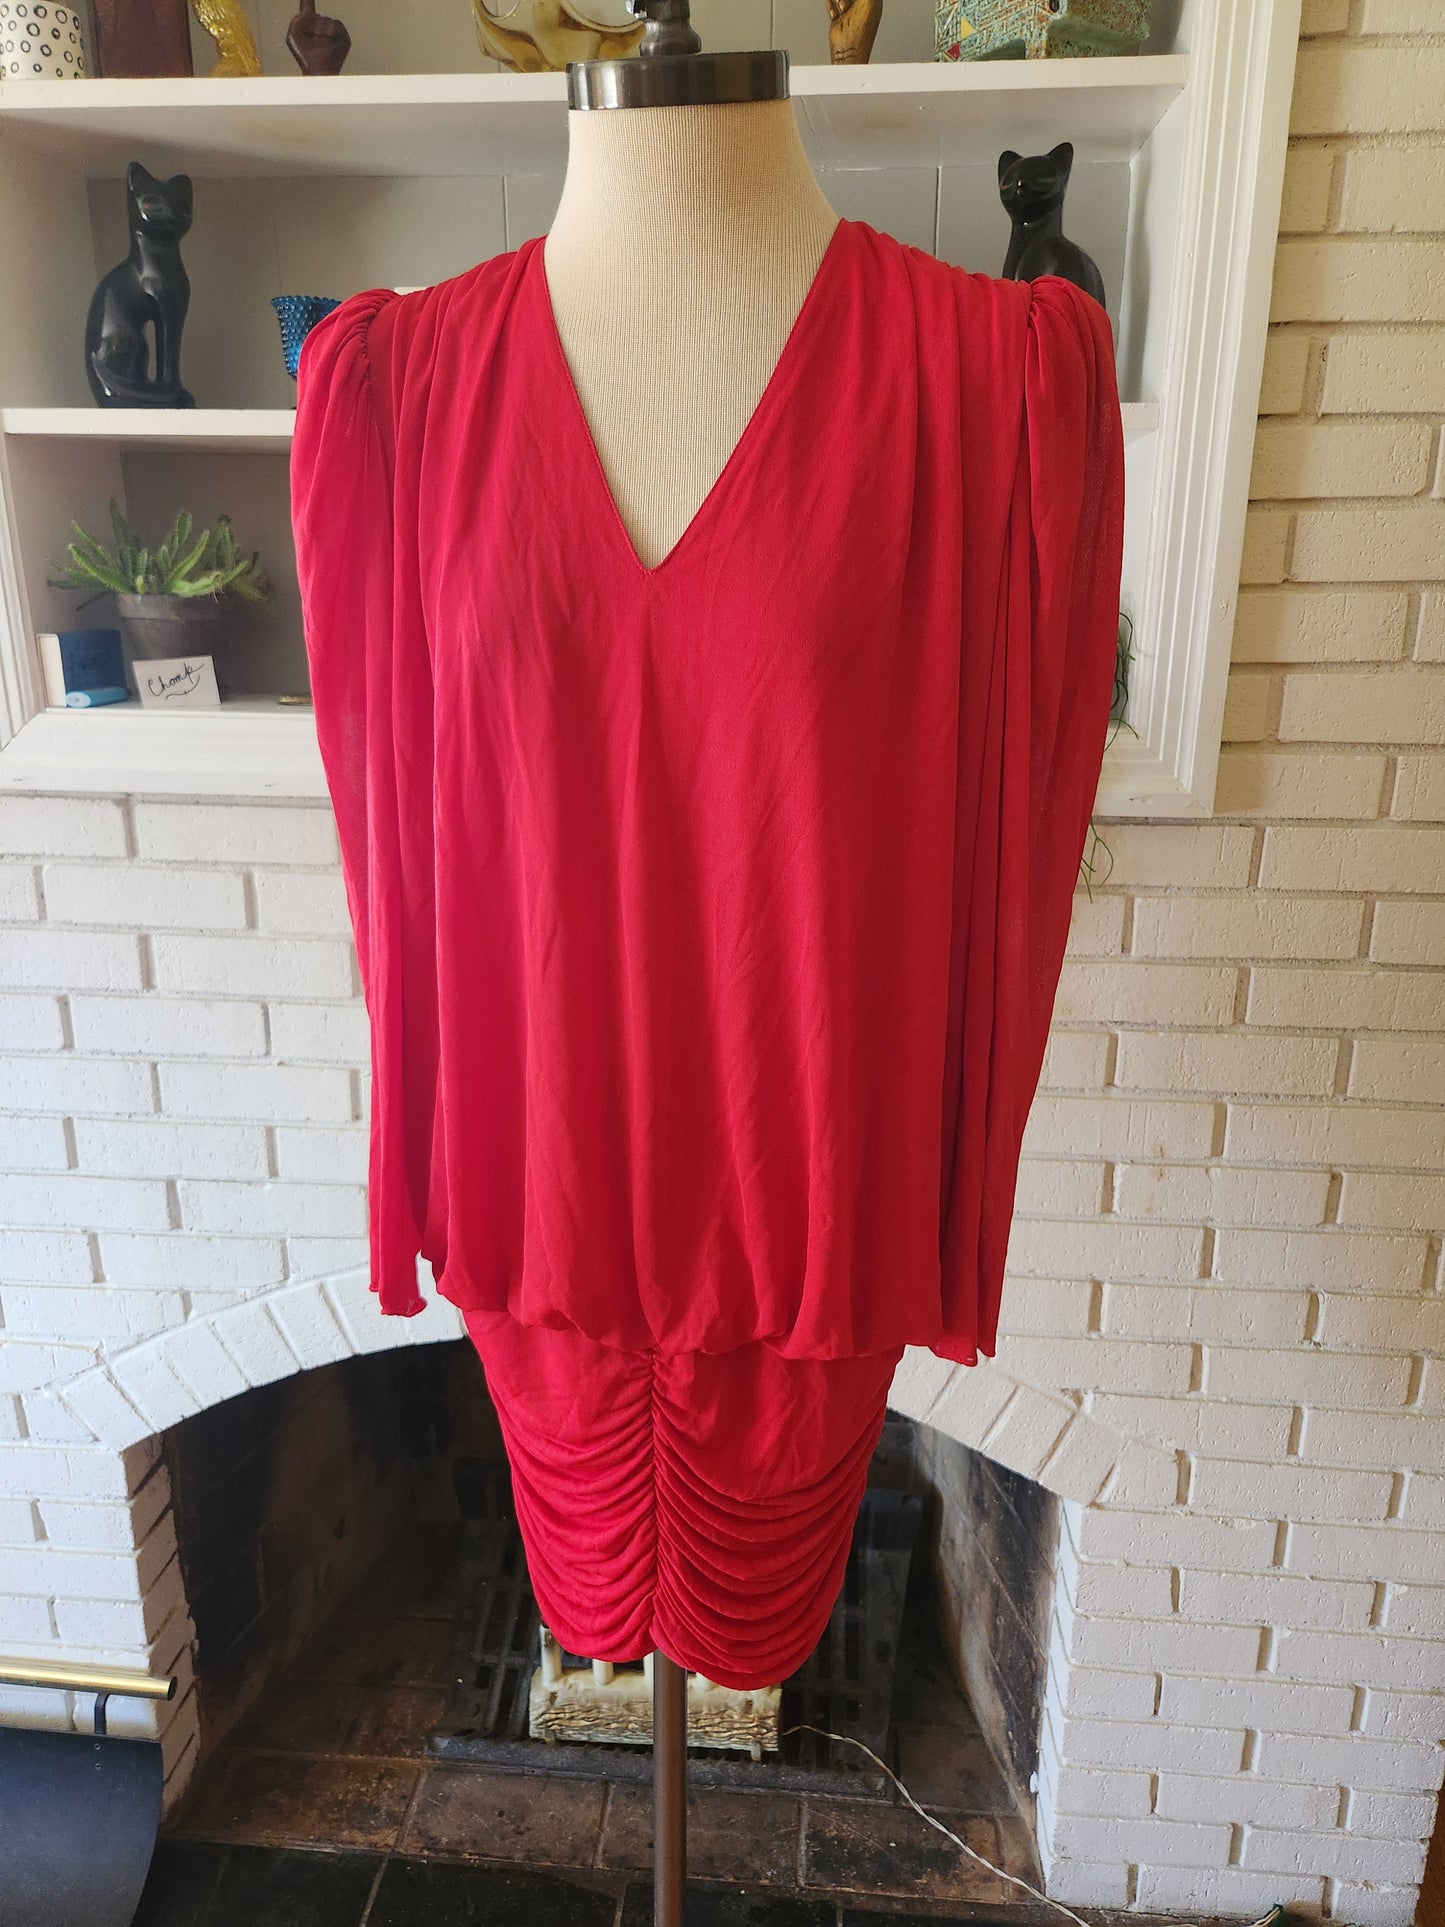 Vintage Long Sleeve Red Dress by New Leaf